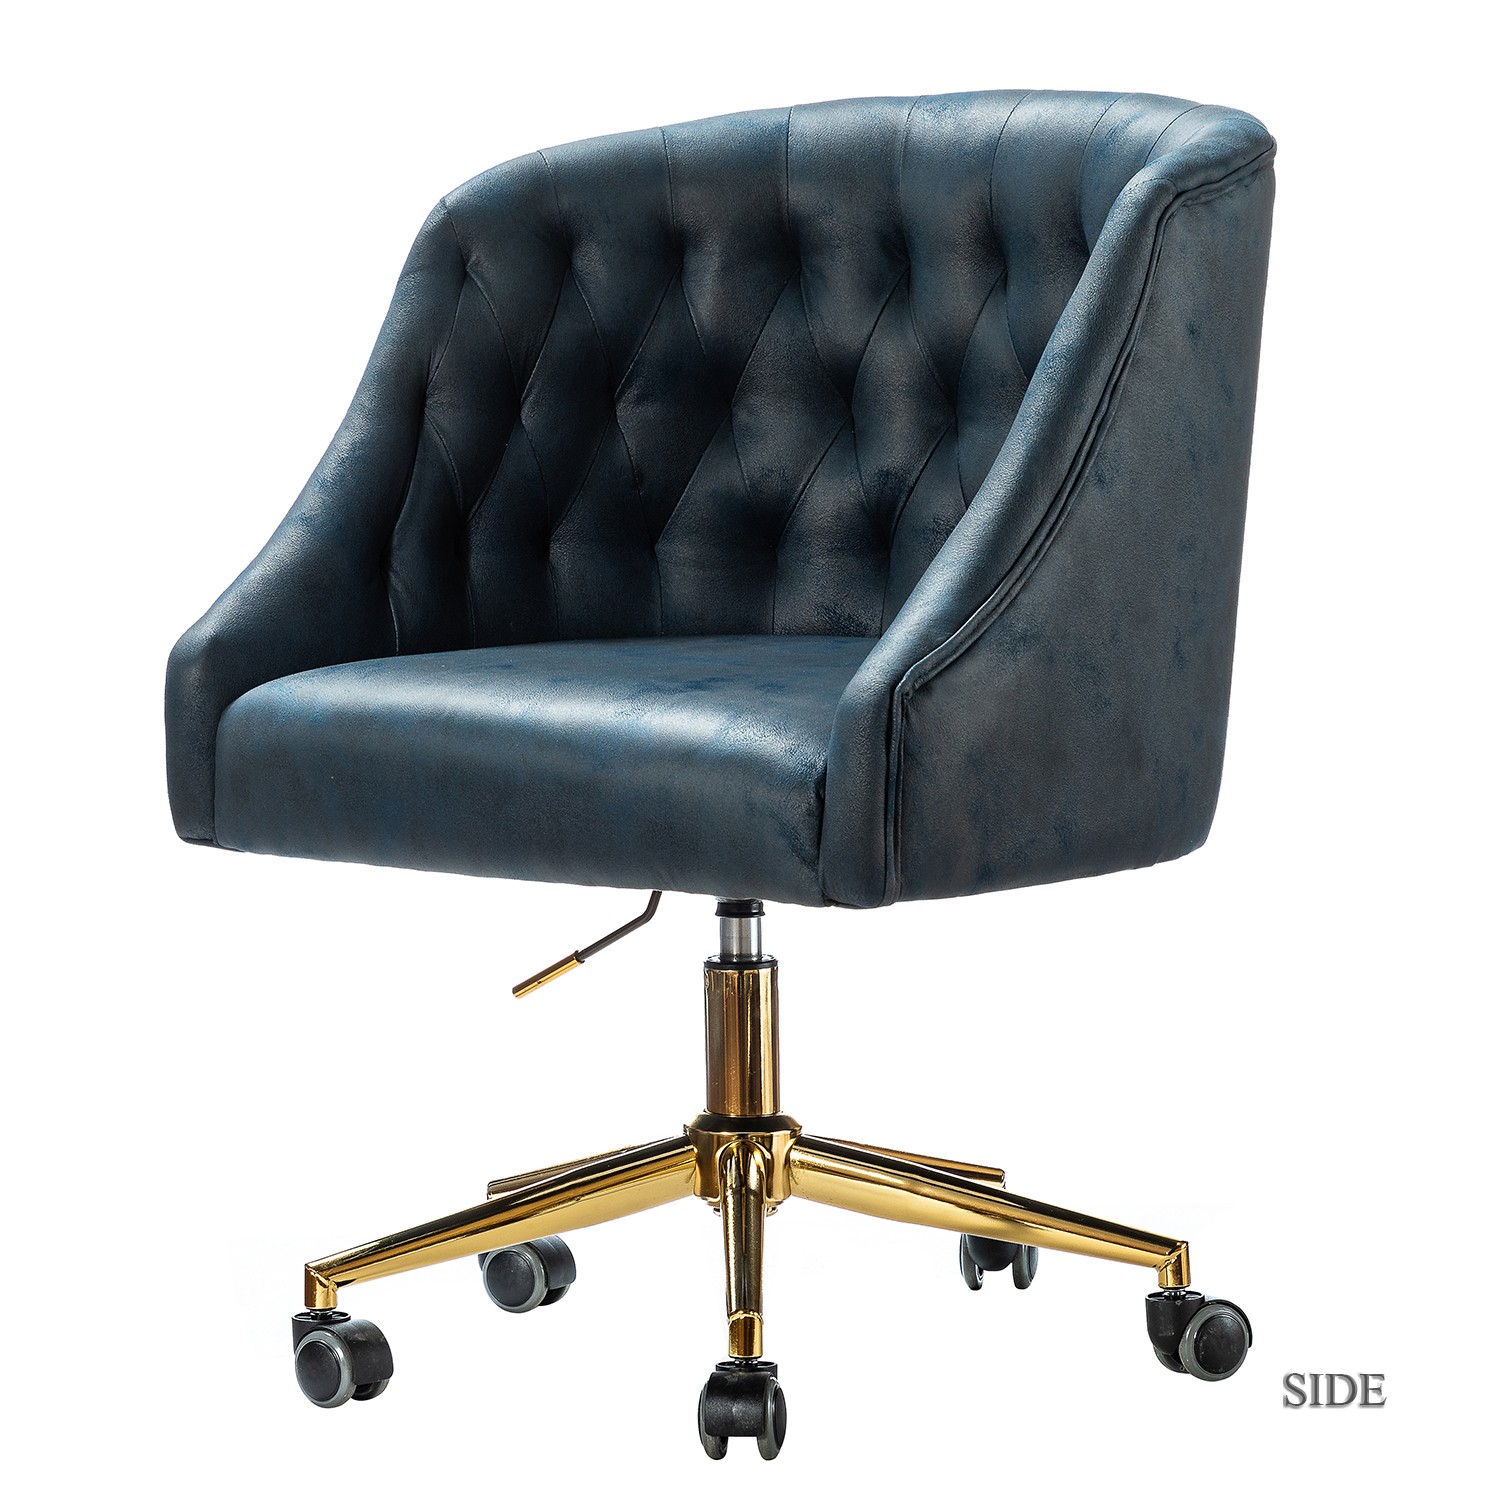 Gorgeous Tufted Navy and Gold Faux Leather Office Chair